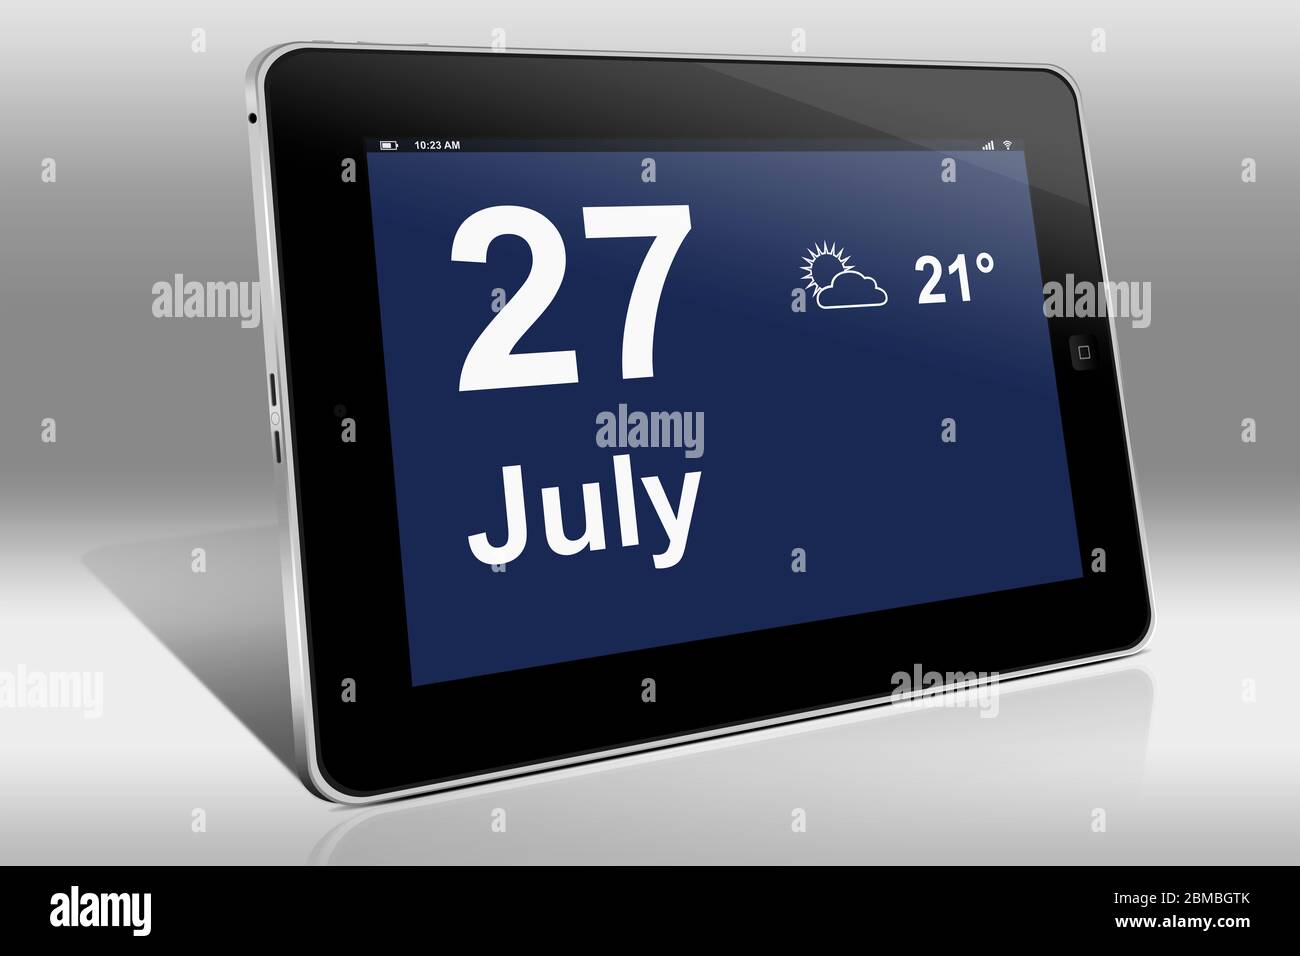 A tablet computer displays a calendar in English language with the date July 27th | Ein Tablet-Computer zeigt in Englischer Sprache den 27. Juli Stock Photo